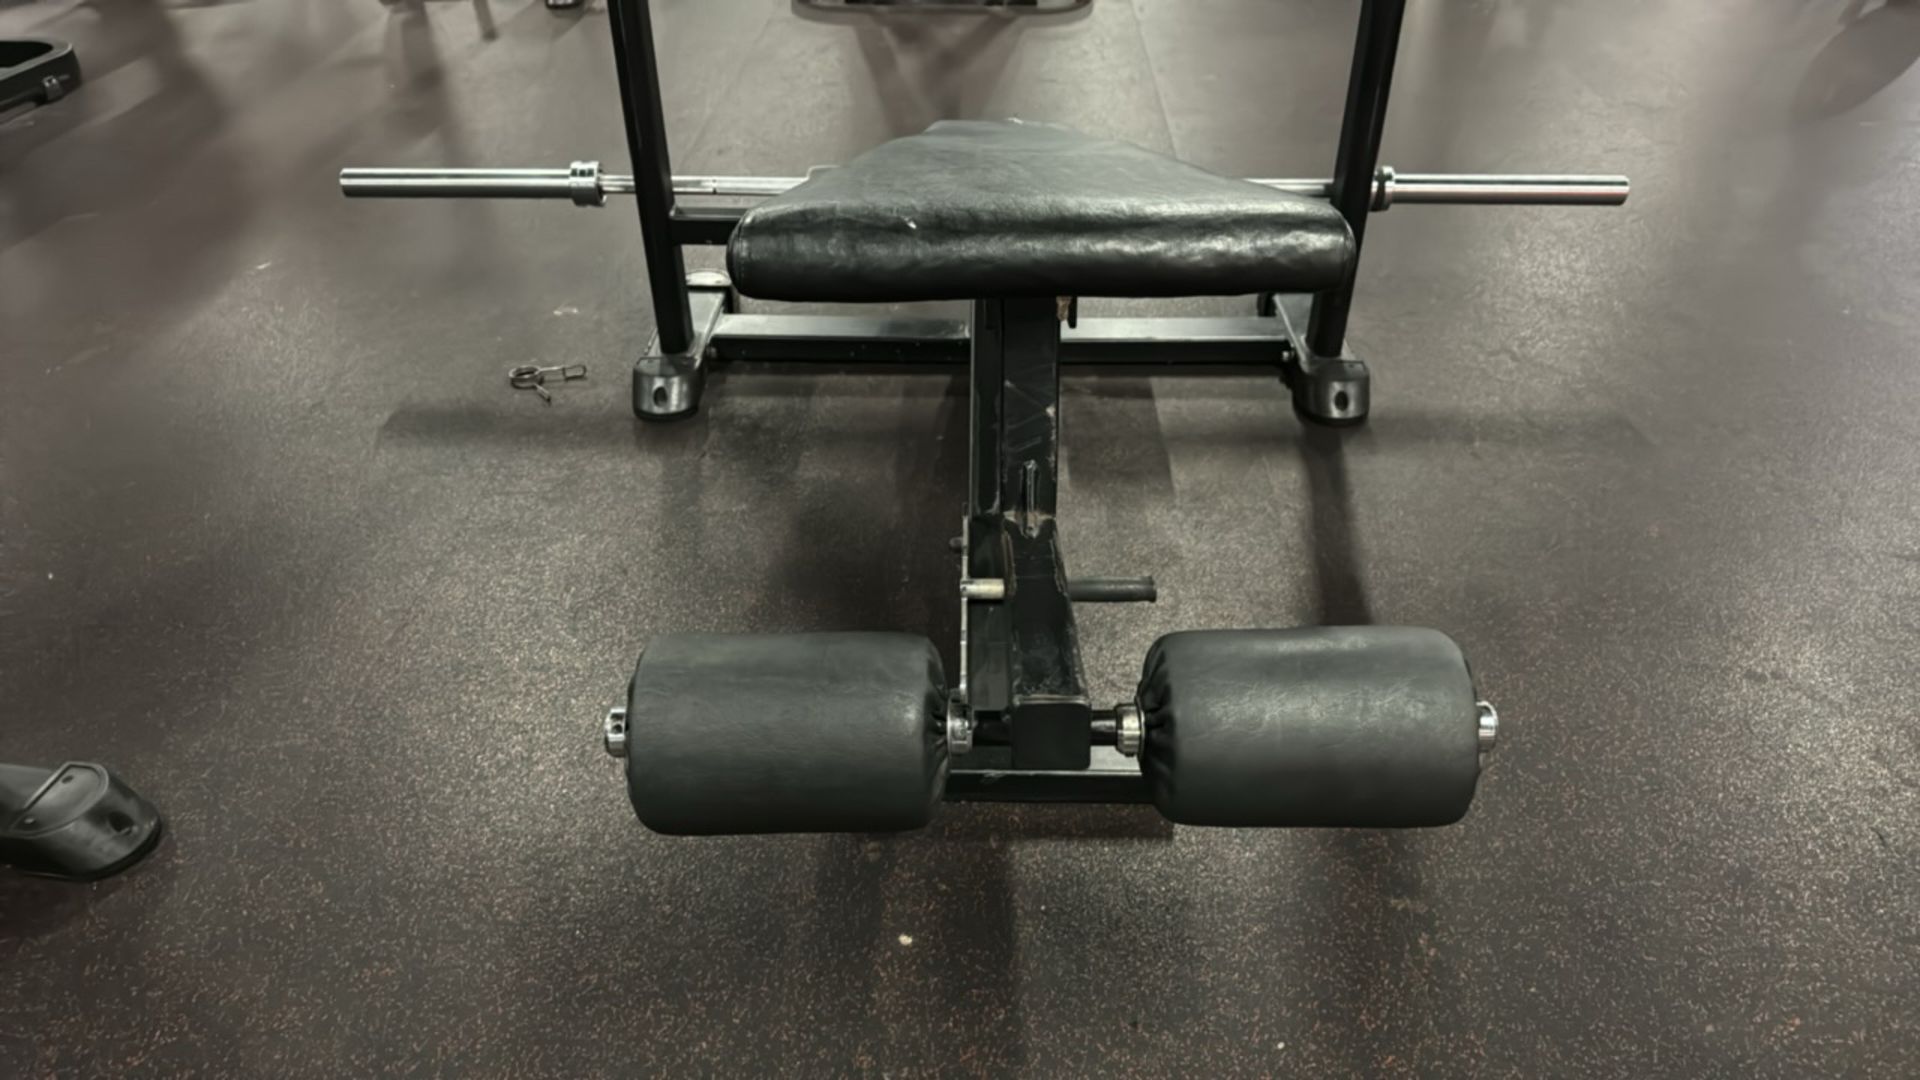 Decline Chest Press Station - Image 4 of 4